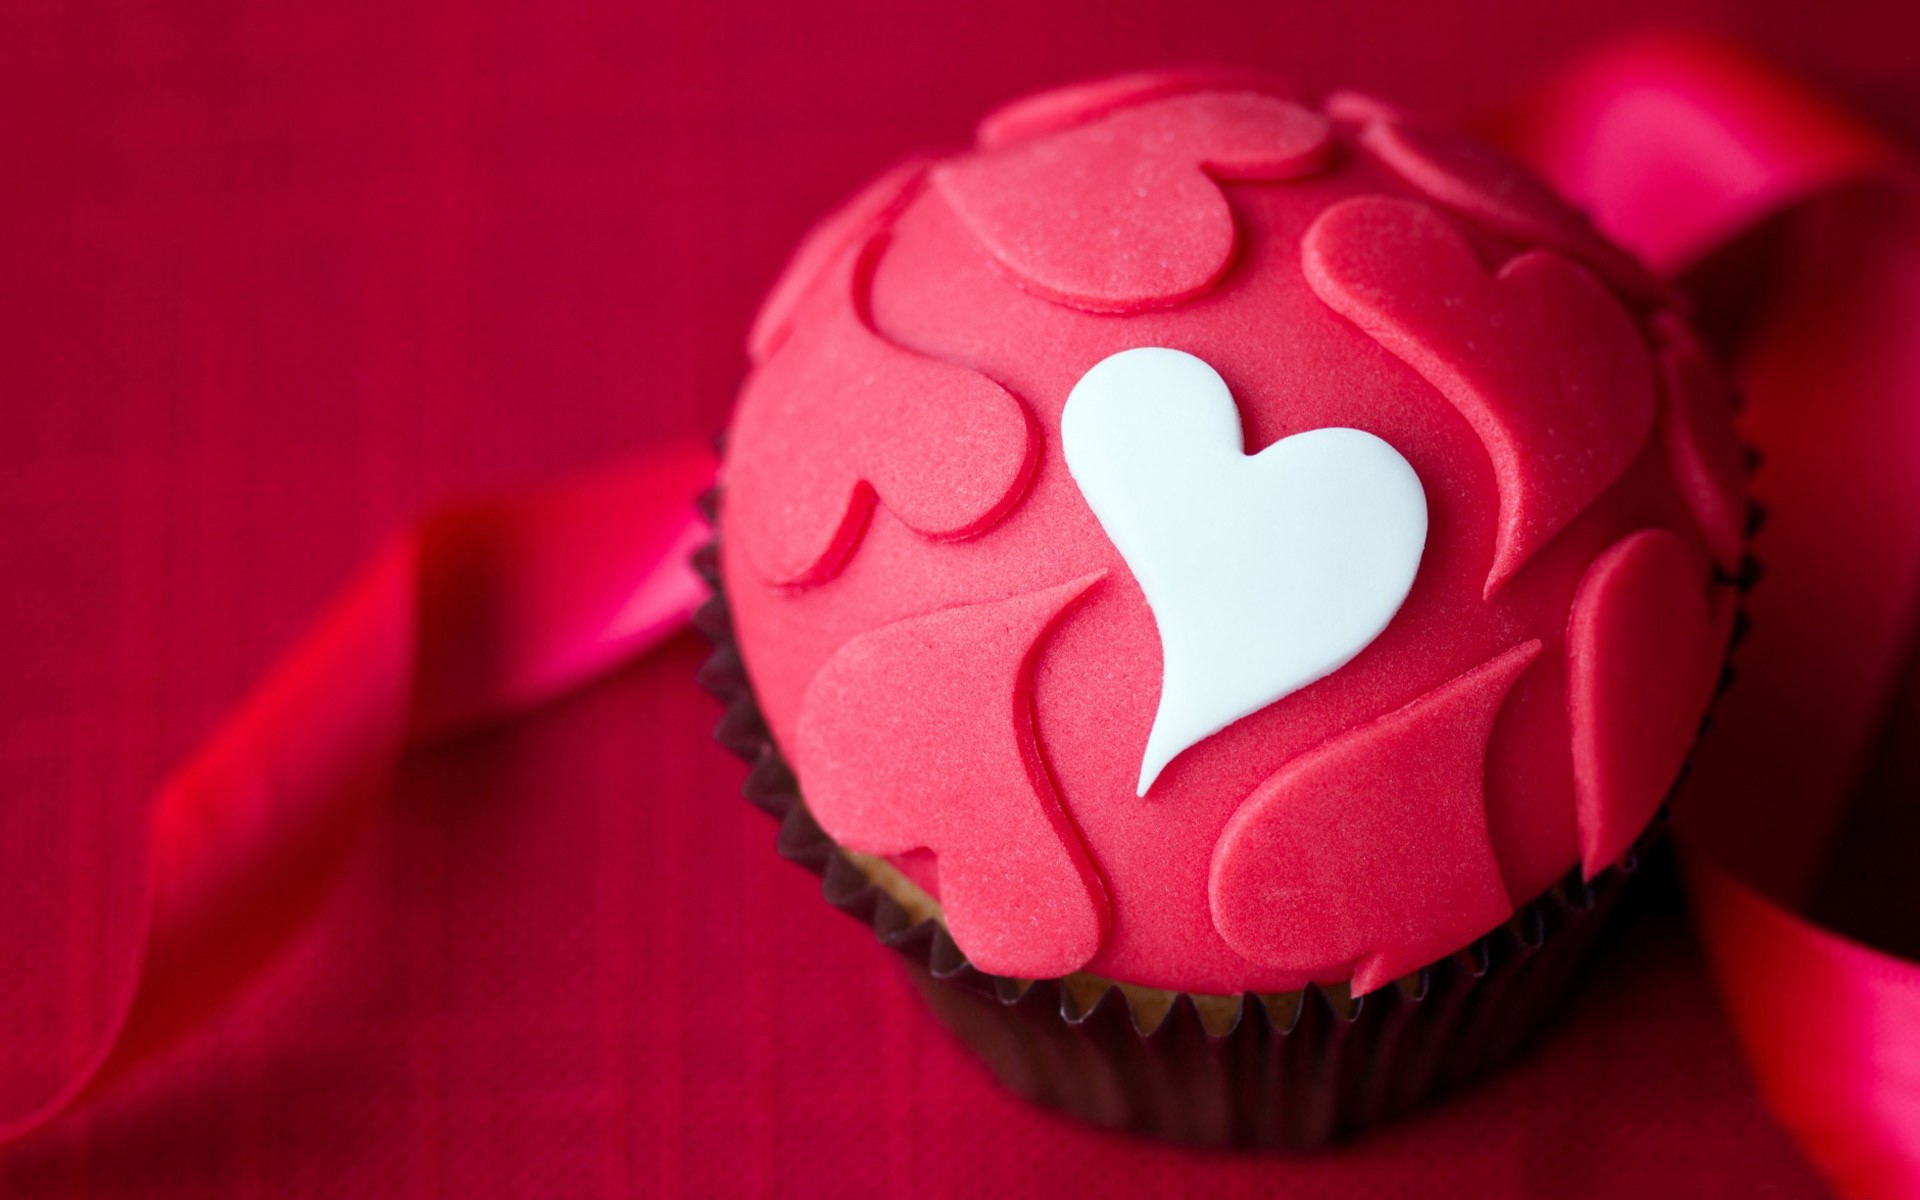 General 1920x1200 love cupcakes food sweets red background heart (design) digital art